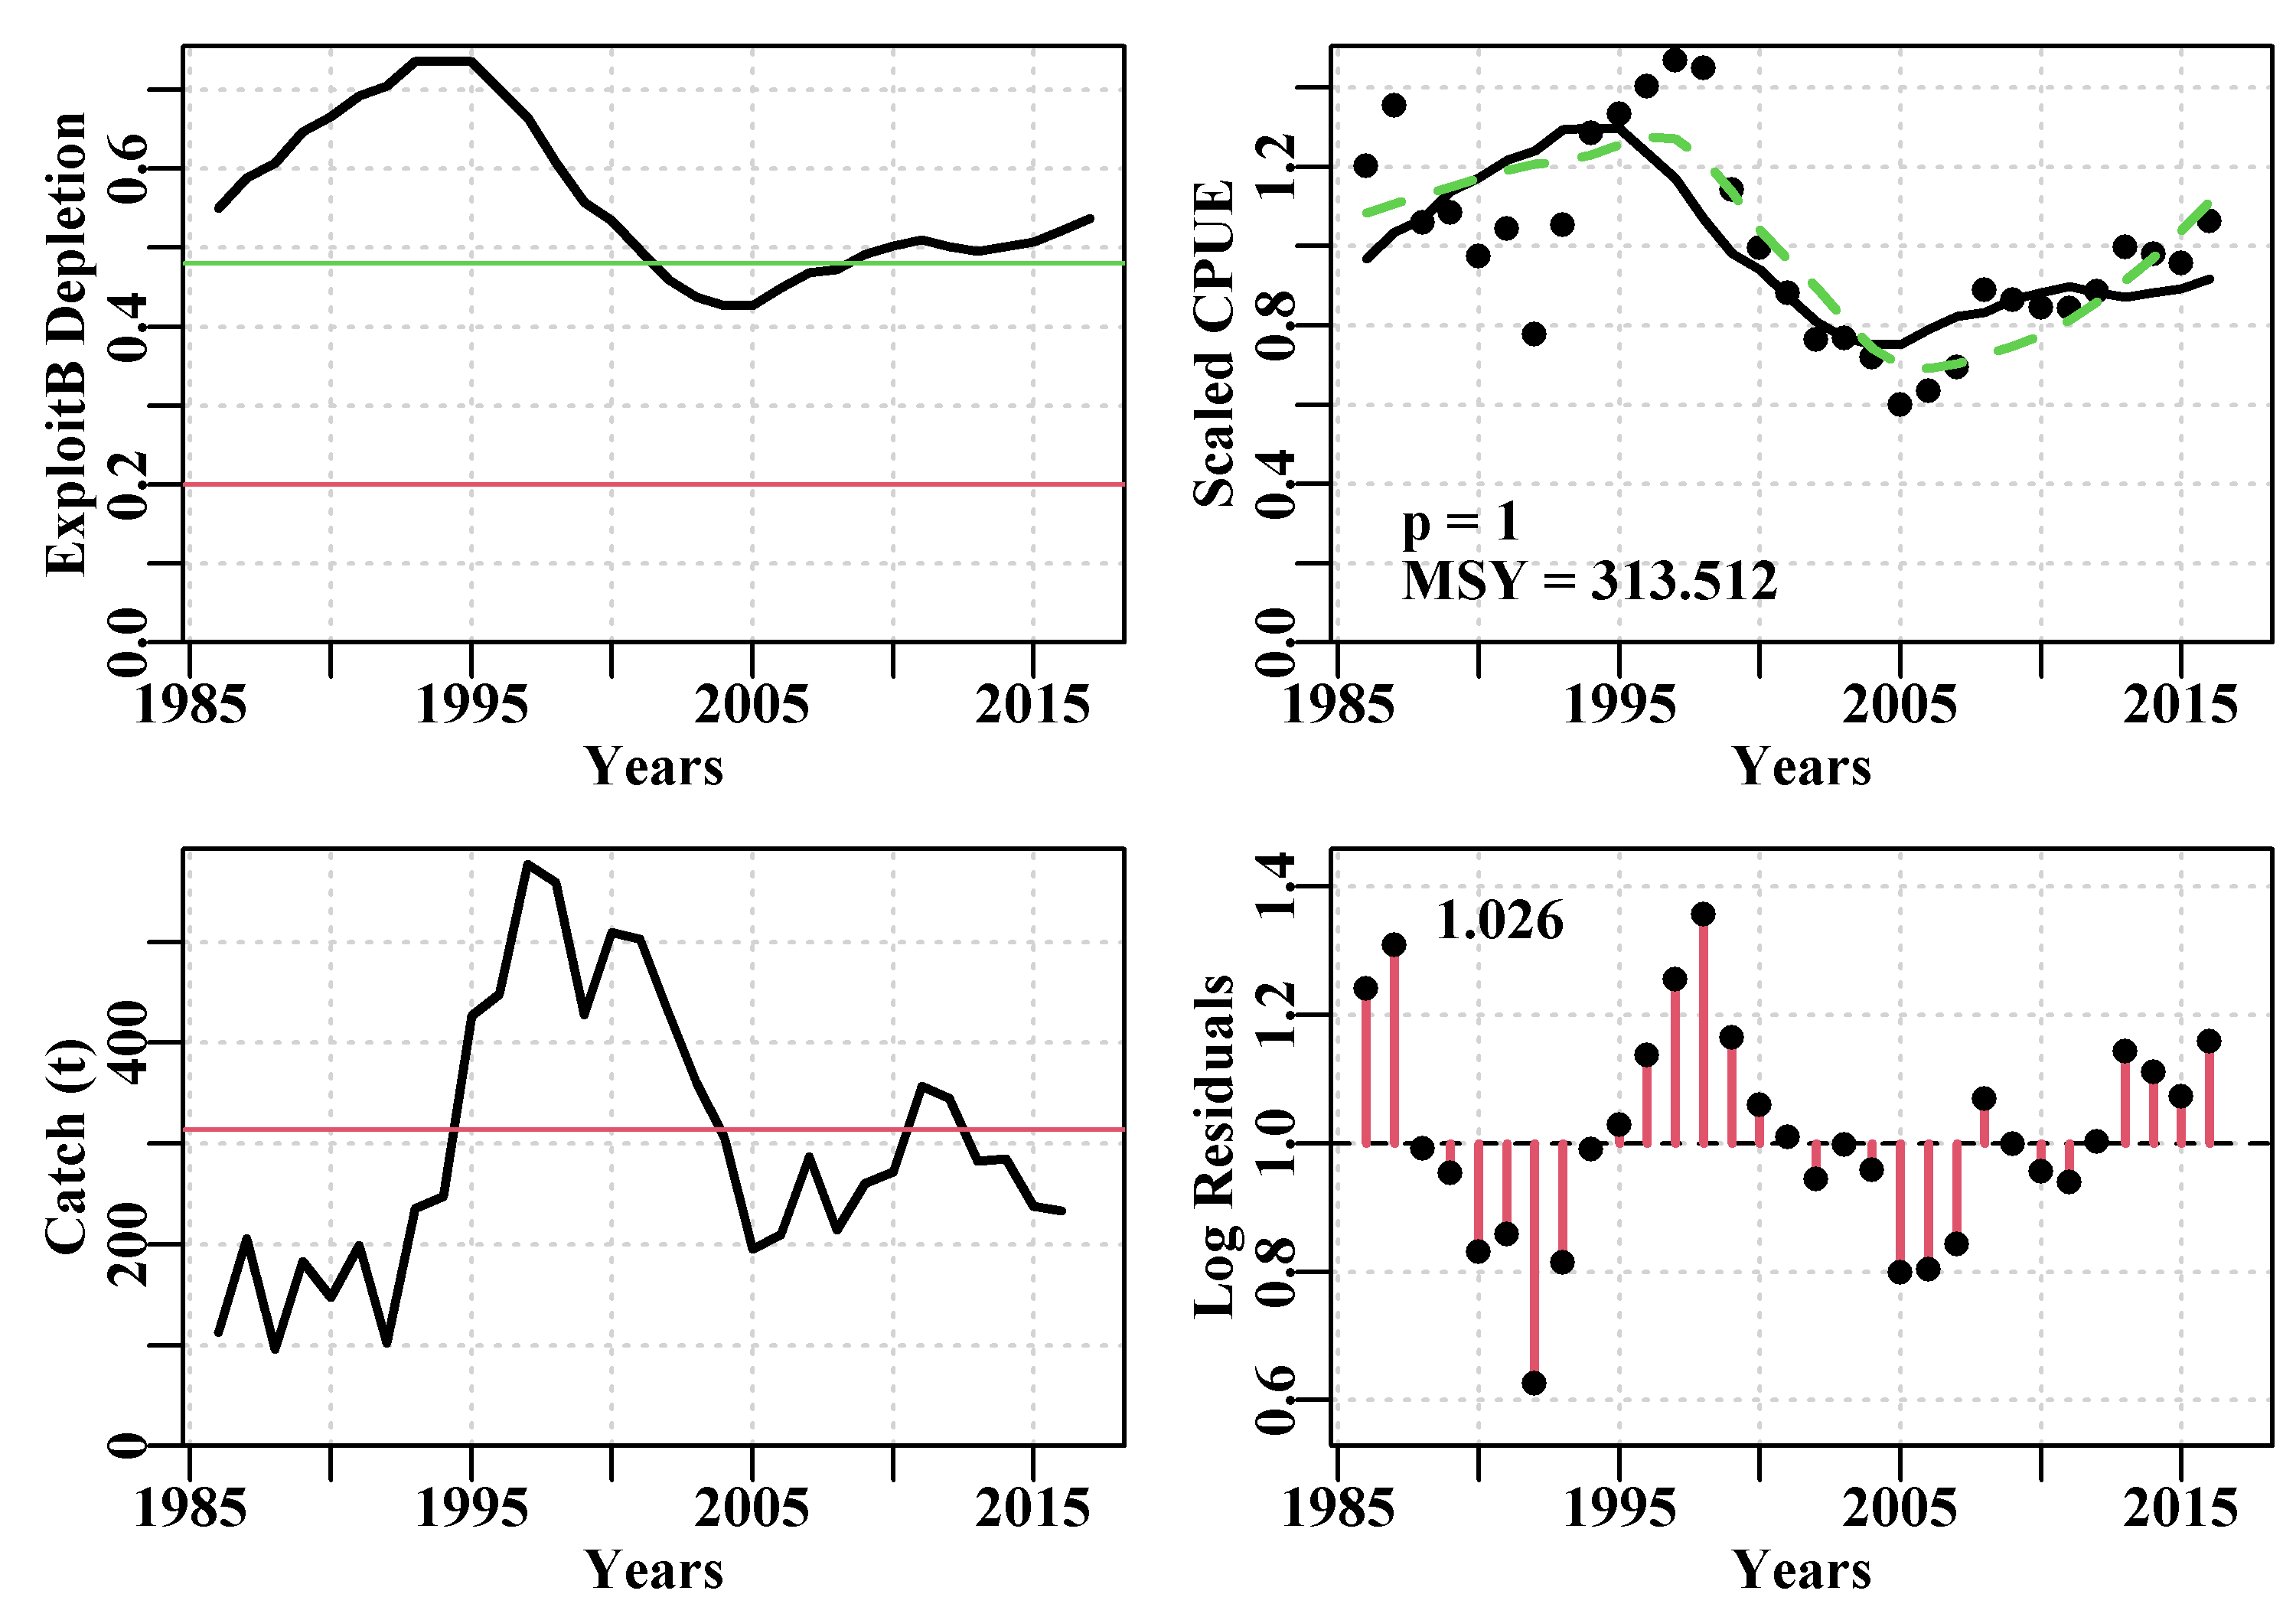 Summary plot depicting the fit of the optimum parameters to the dataspm data-set. The log-normal residuals between the fit and the cpue data are illustrated at the bottom right. These are what are bootstrapped and each bootstrap sample multiplied by the optimum predicted cpue time-series to obtain each bootstrap cpue time-series.